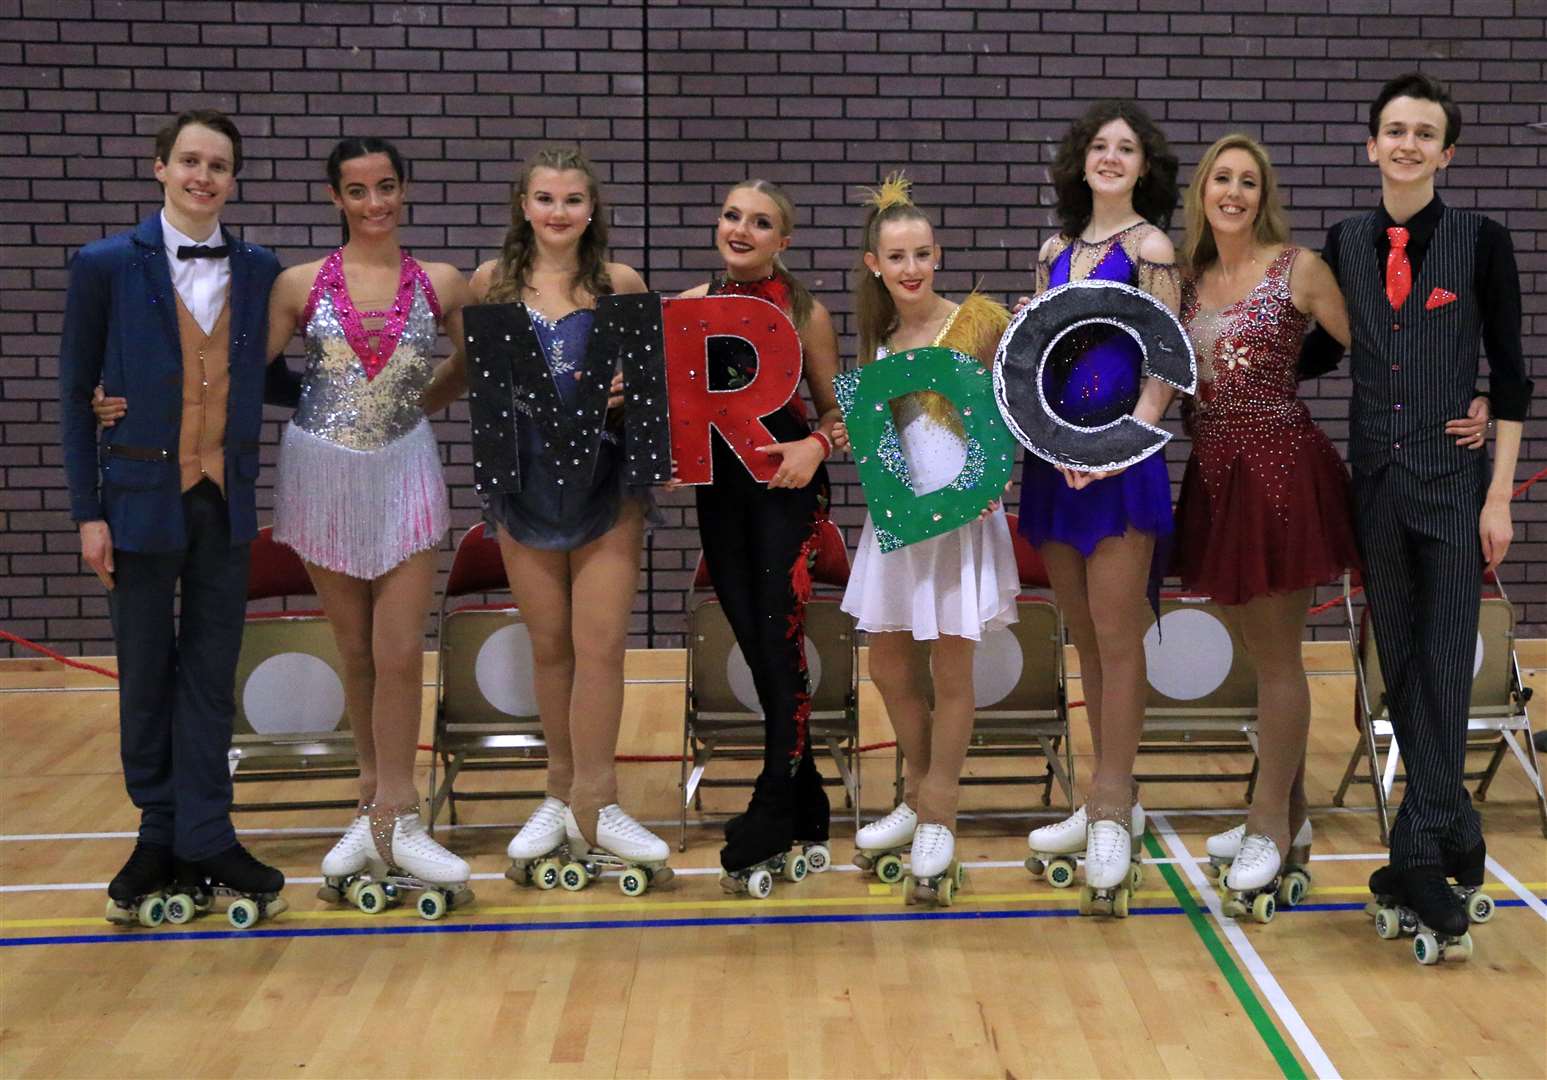 Maidstone Roller Dance Club members at the British Championships Oliver Martin, Lucy Aves, Anna Slokenberga, Laura Donoghue, Katy Bray, Iza Jarvis, Ann Odhams and Zac Martin